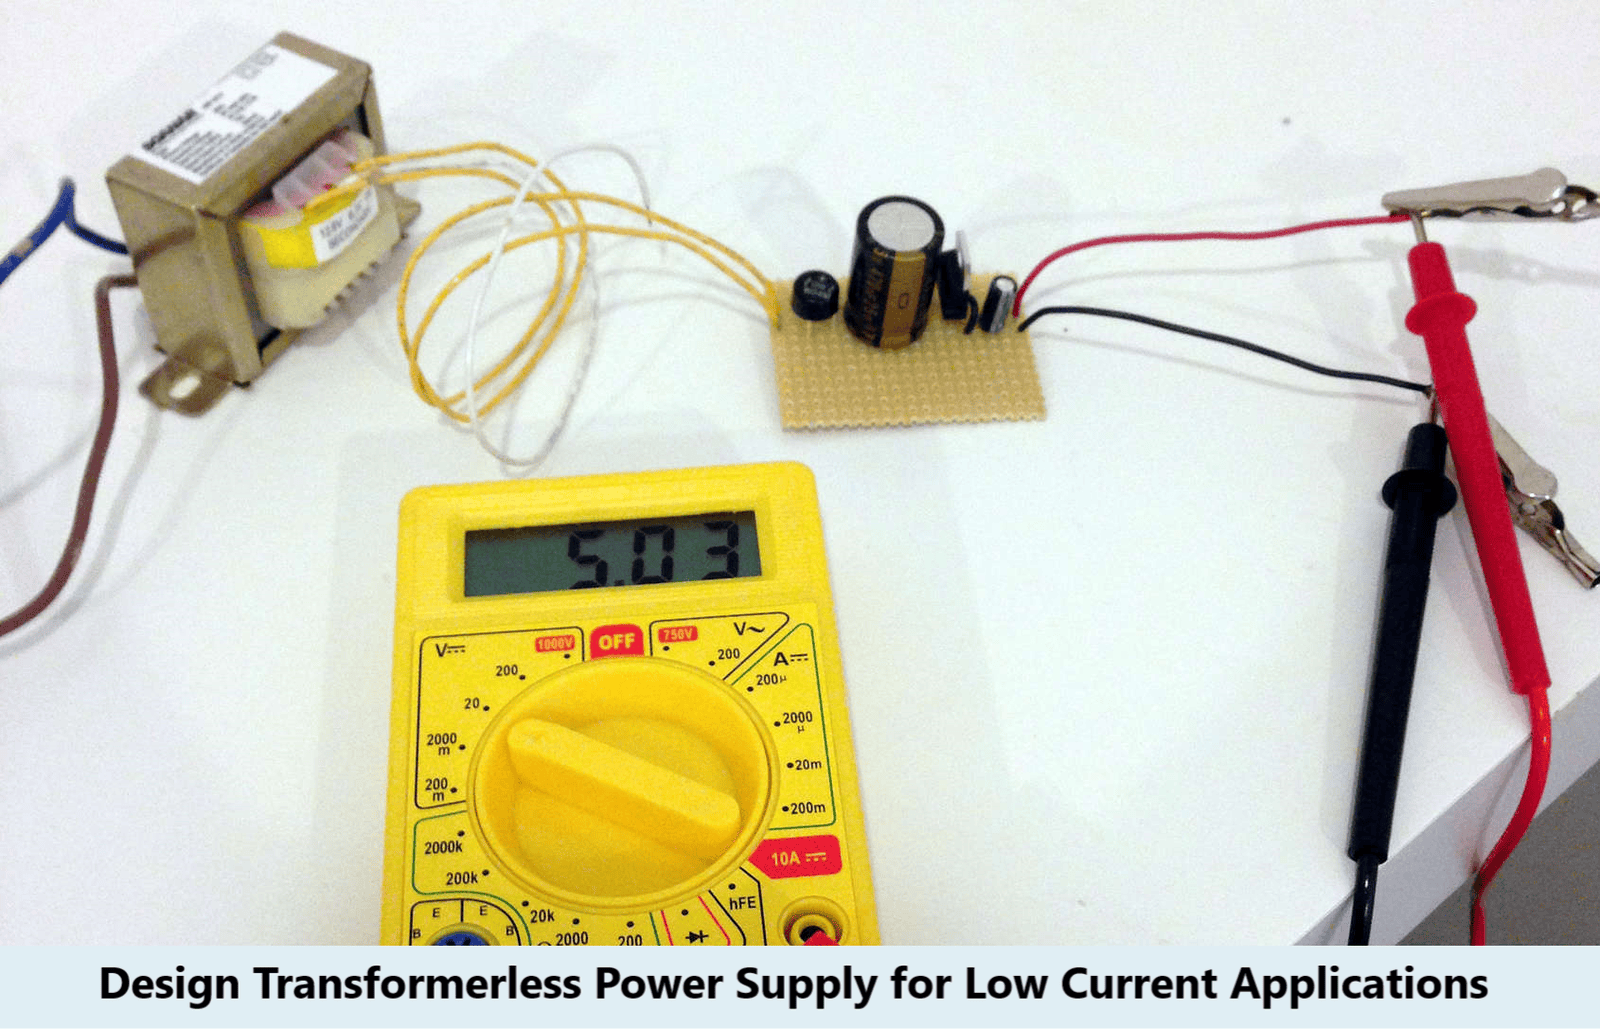 Design Transformerless Power Supply for Low Current Applications | Campus